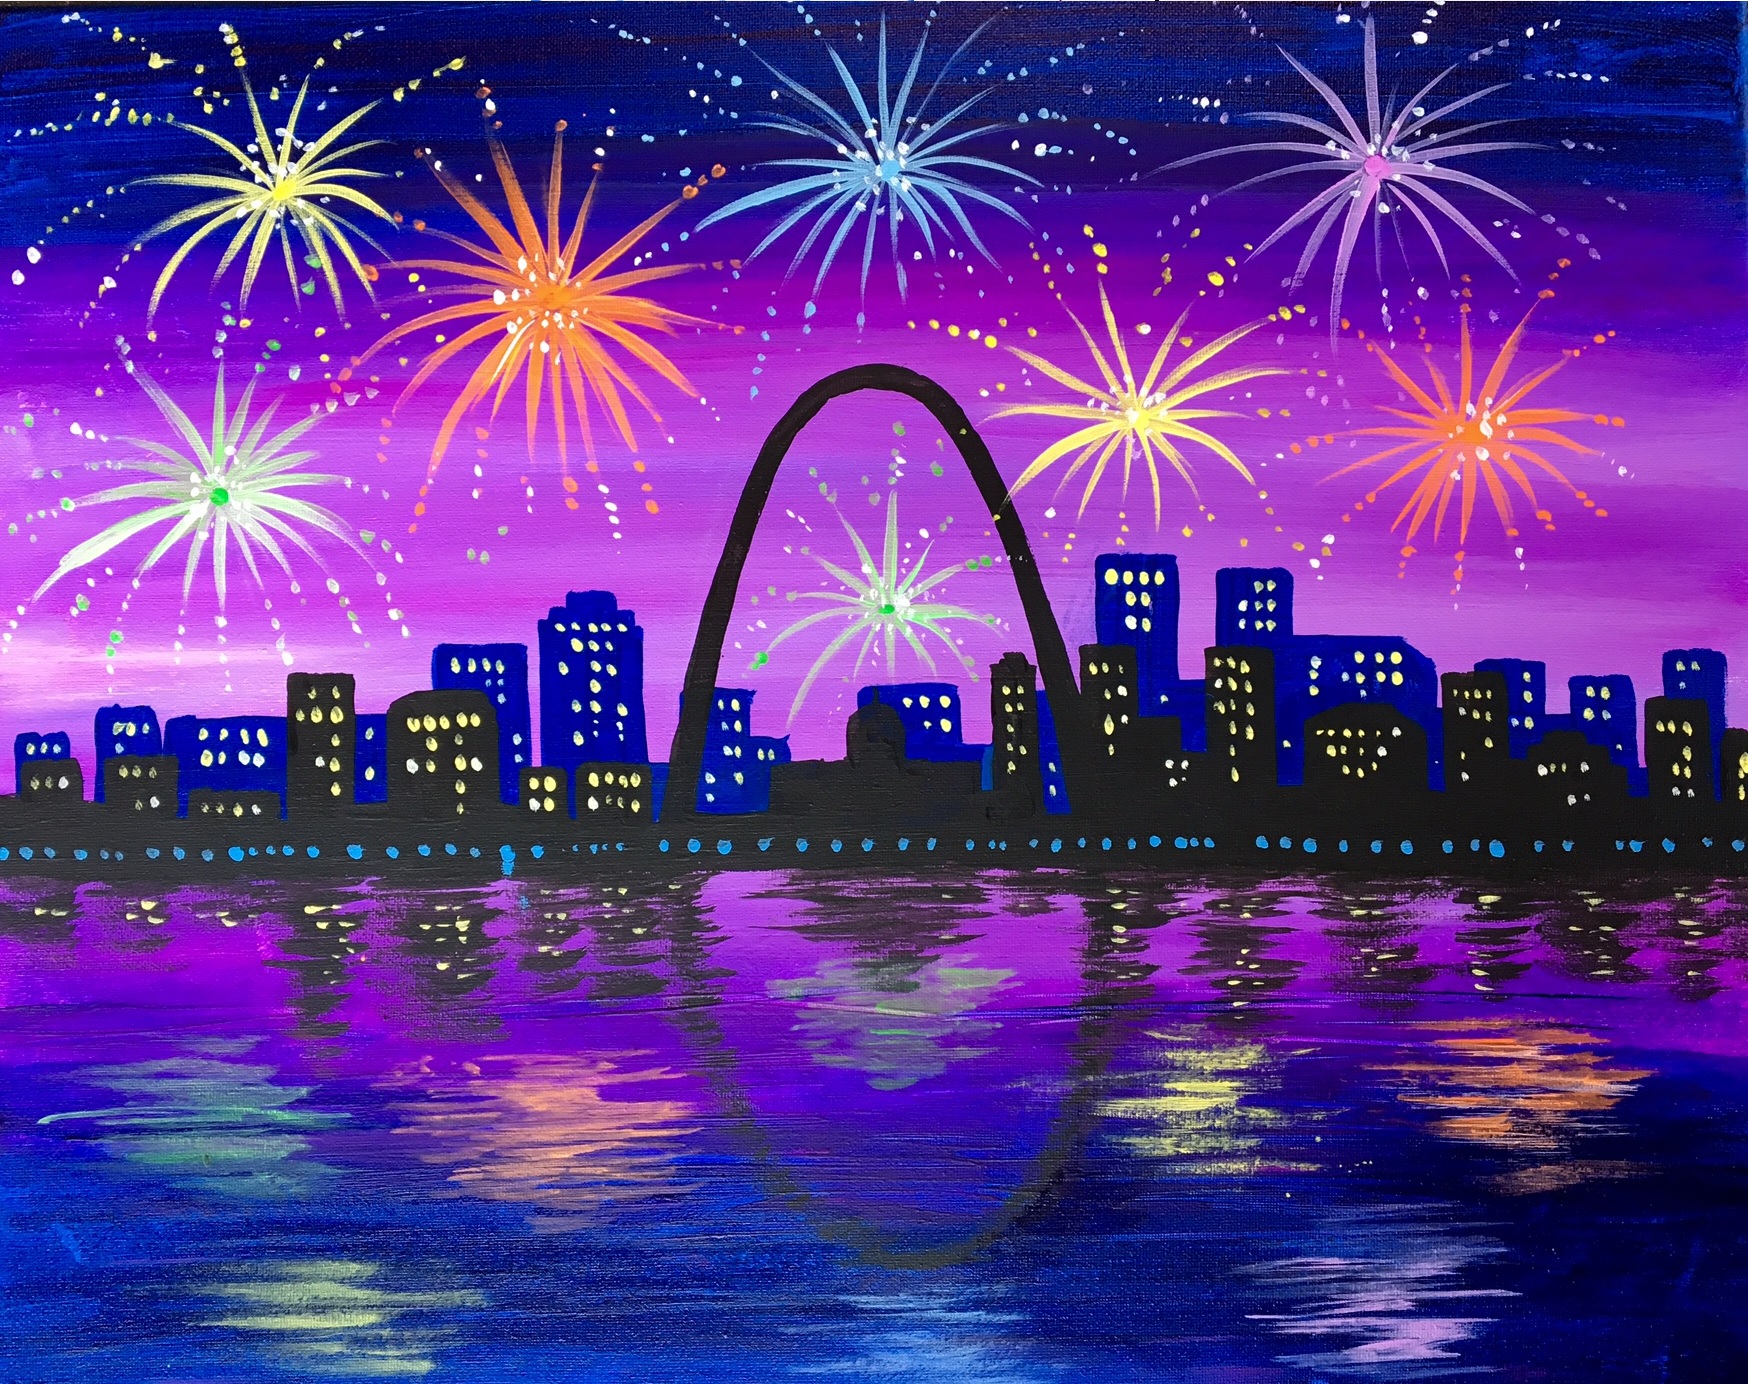 Fireworks Over the City